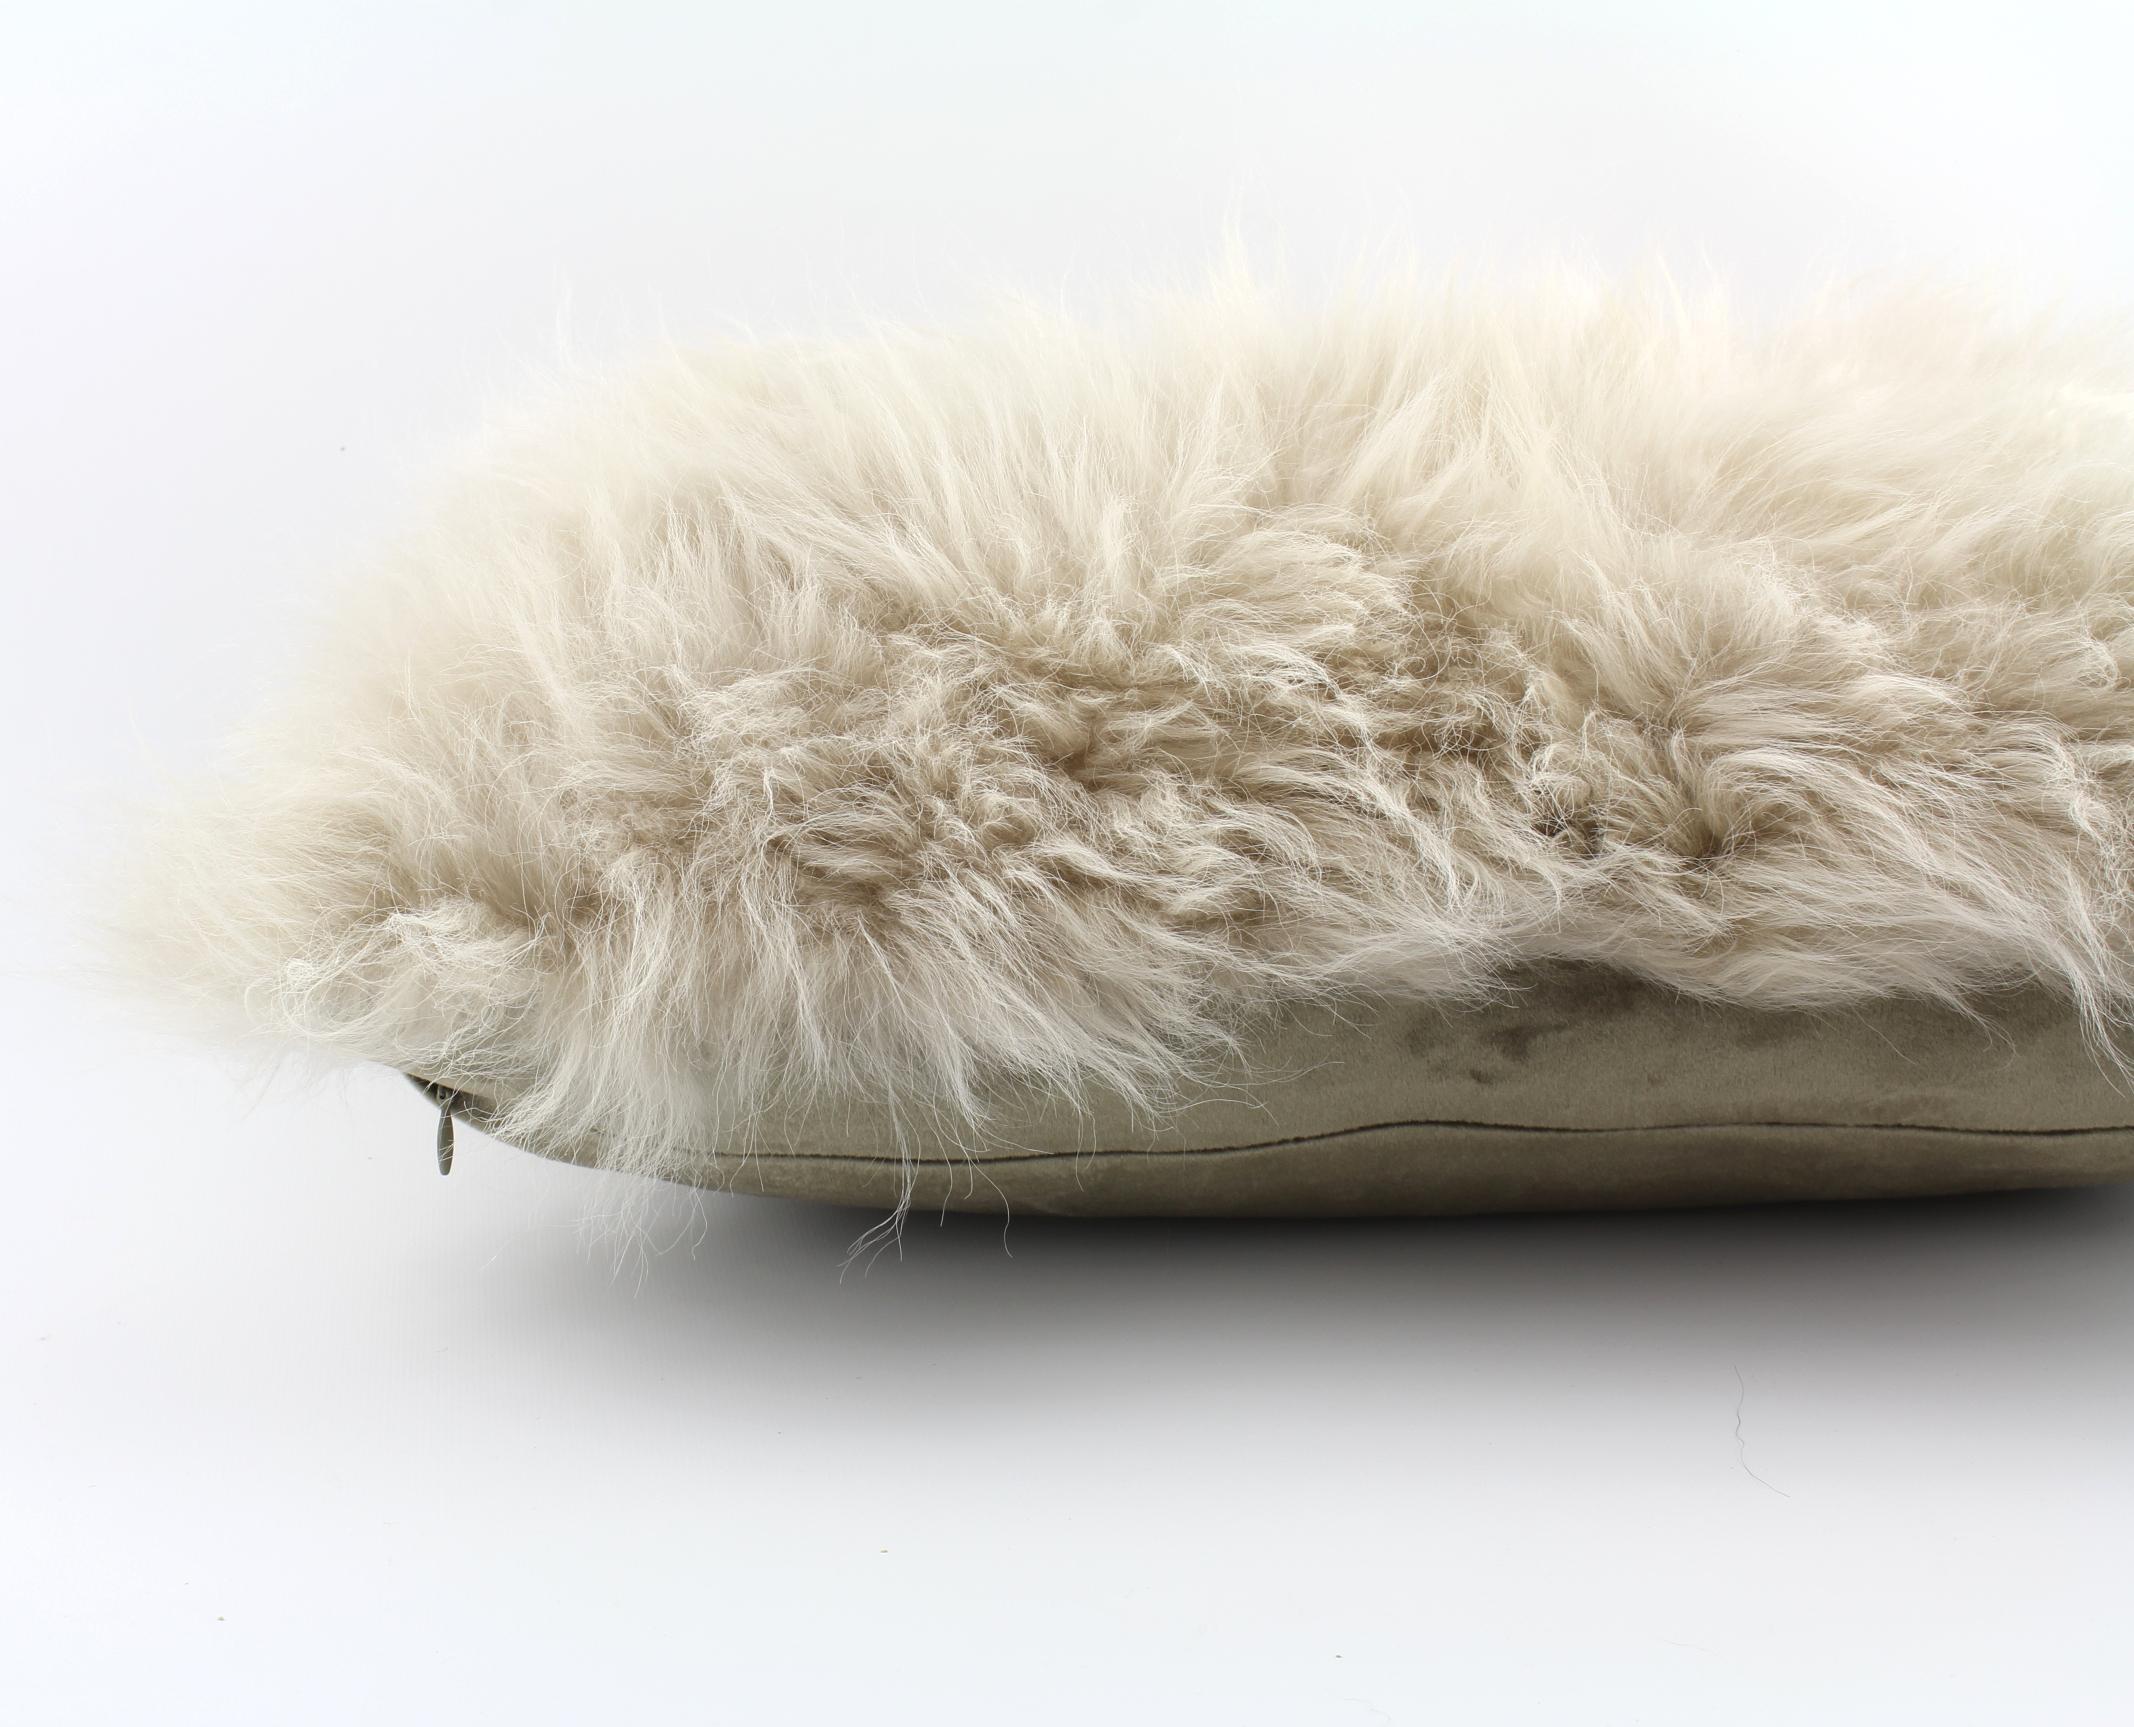 Add opulent and designer styling to a bed or sofa with this luxurious beige fur pillow made from genuine cashmere fur. With only a few pillows made this Classic will be an heirloom accent that will be enjoyed for many years to come. The rectangle